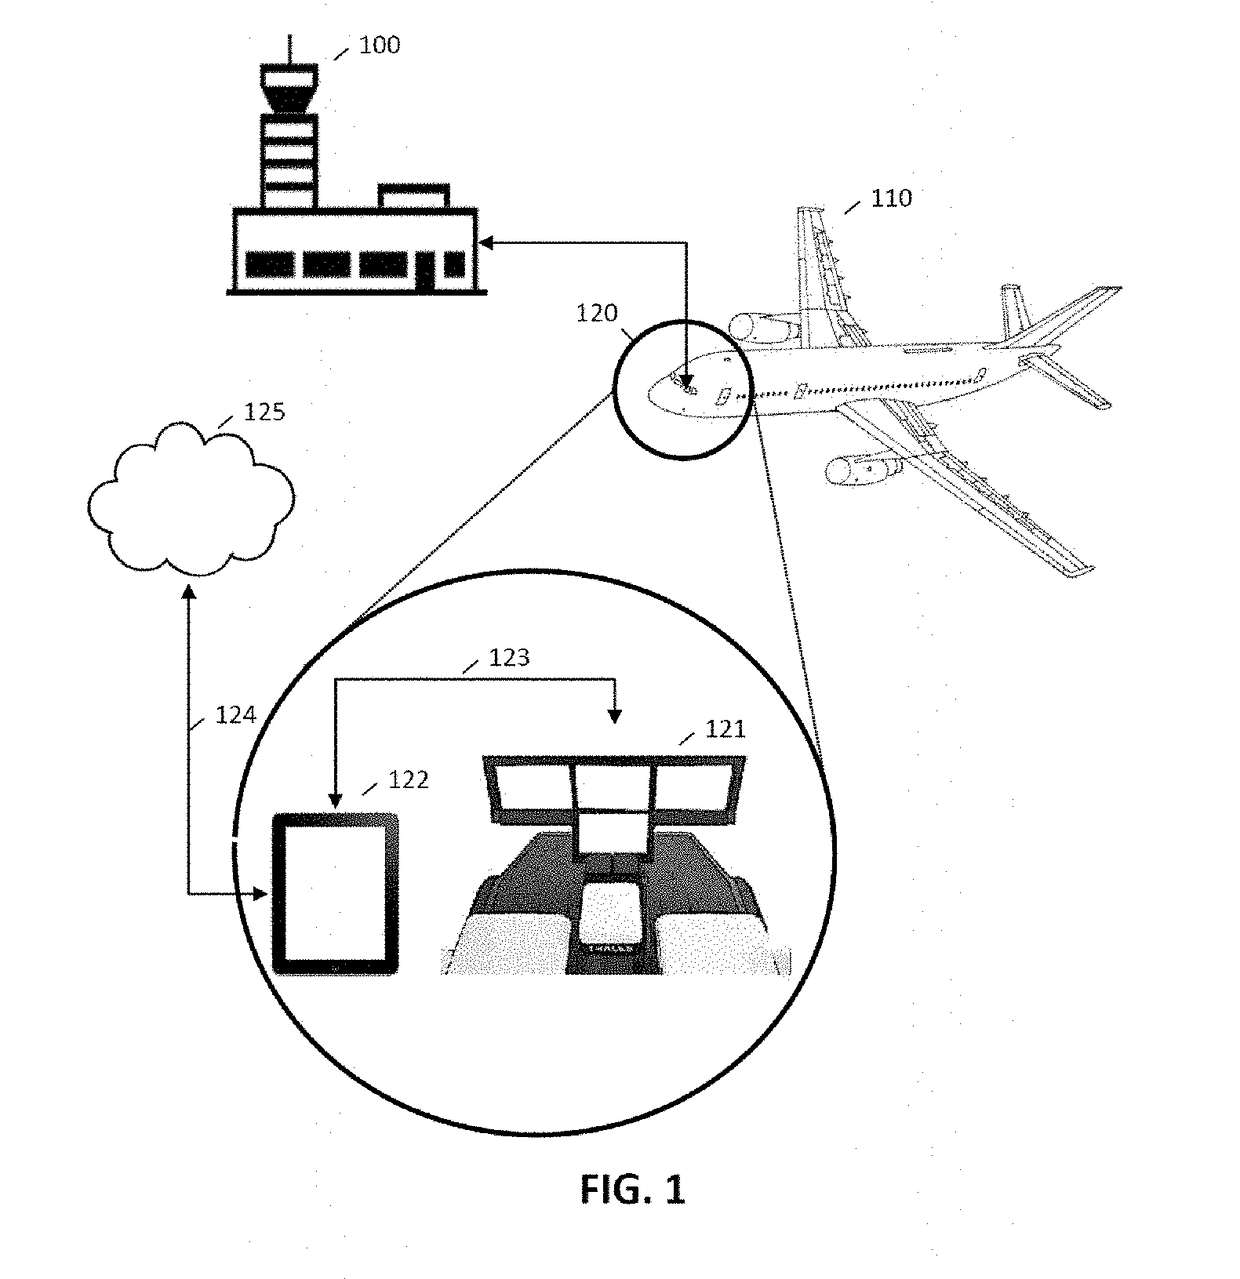 Management of alternative routes for an aircraft